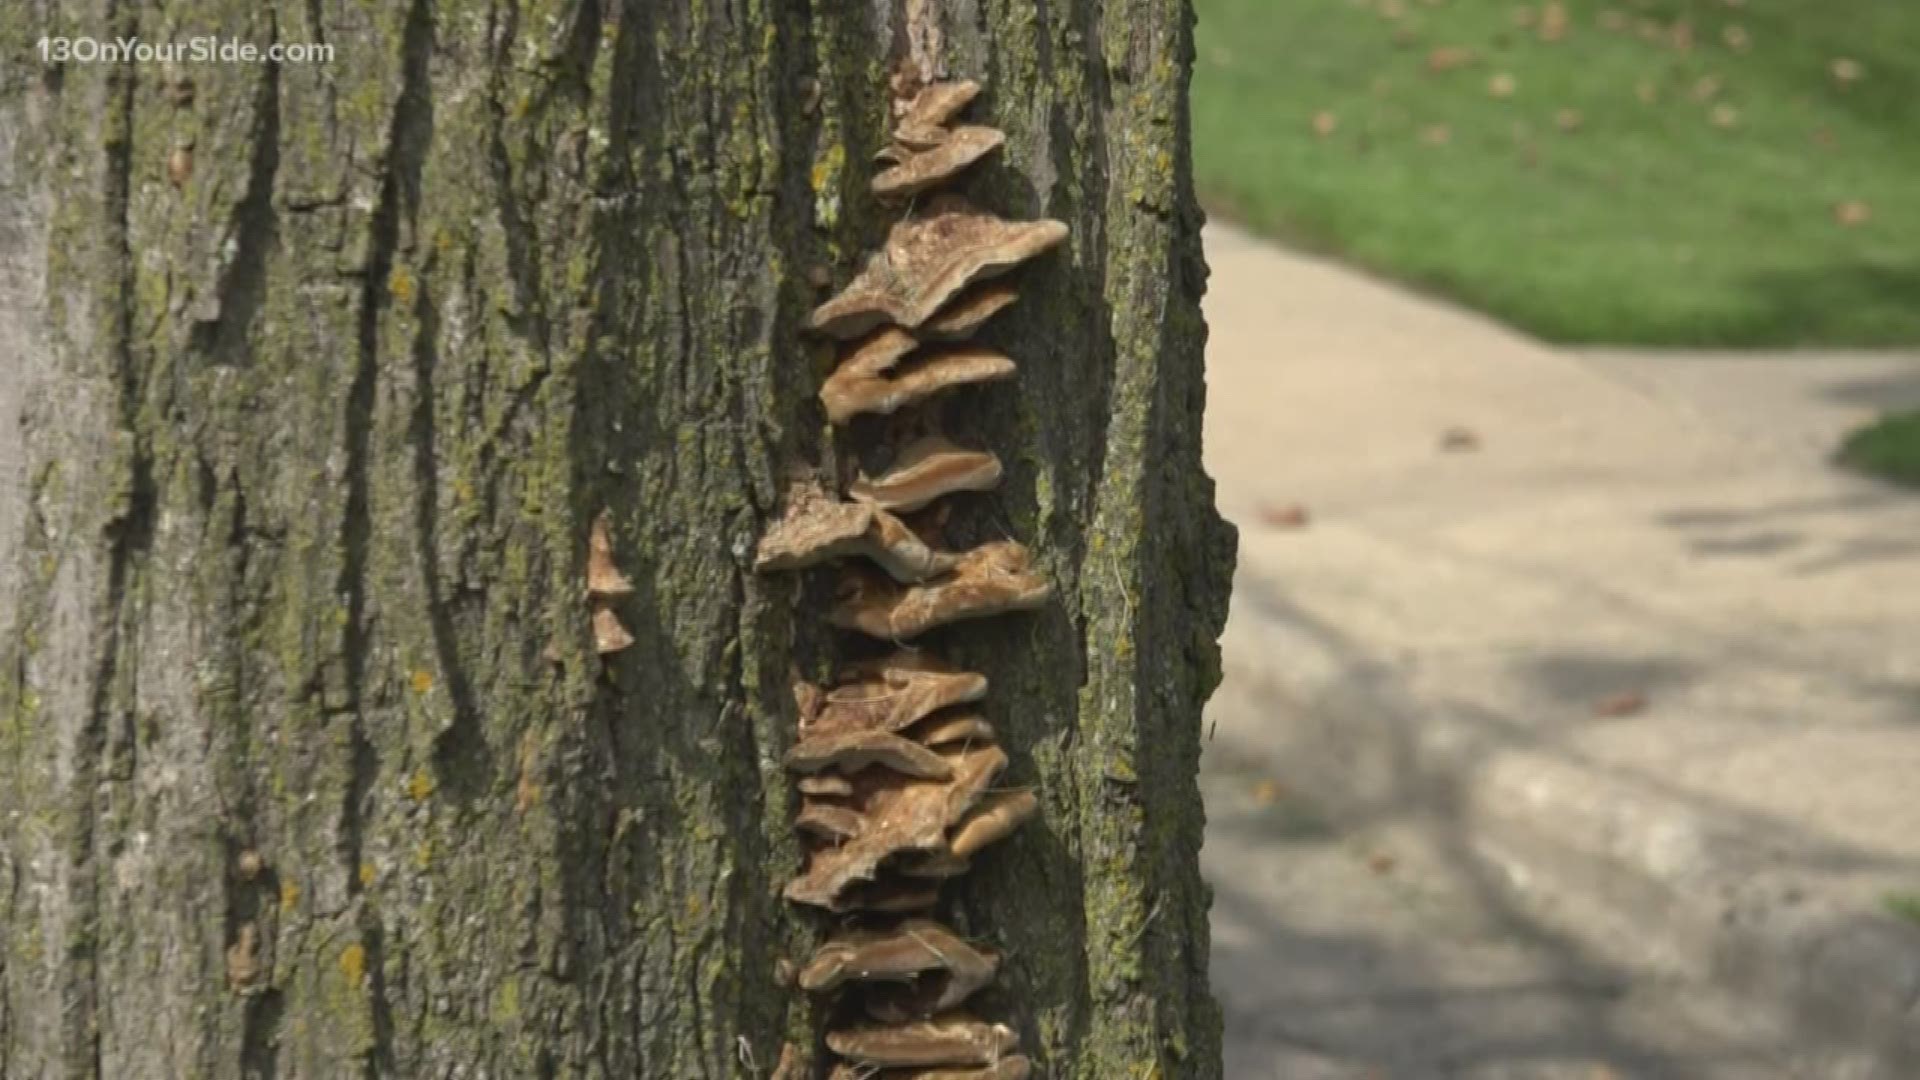 Weakened trees pose safety threat during storms